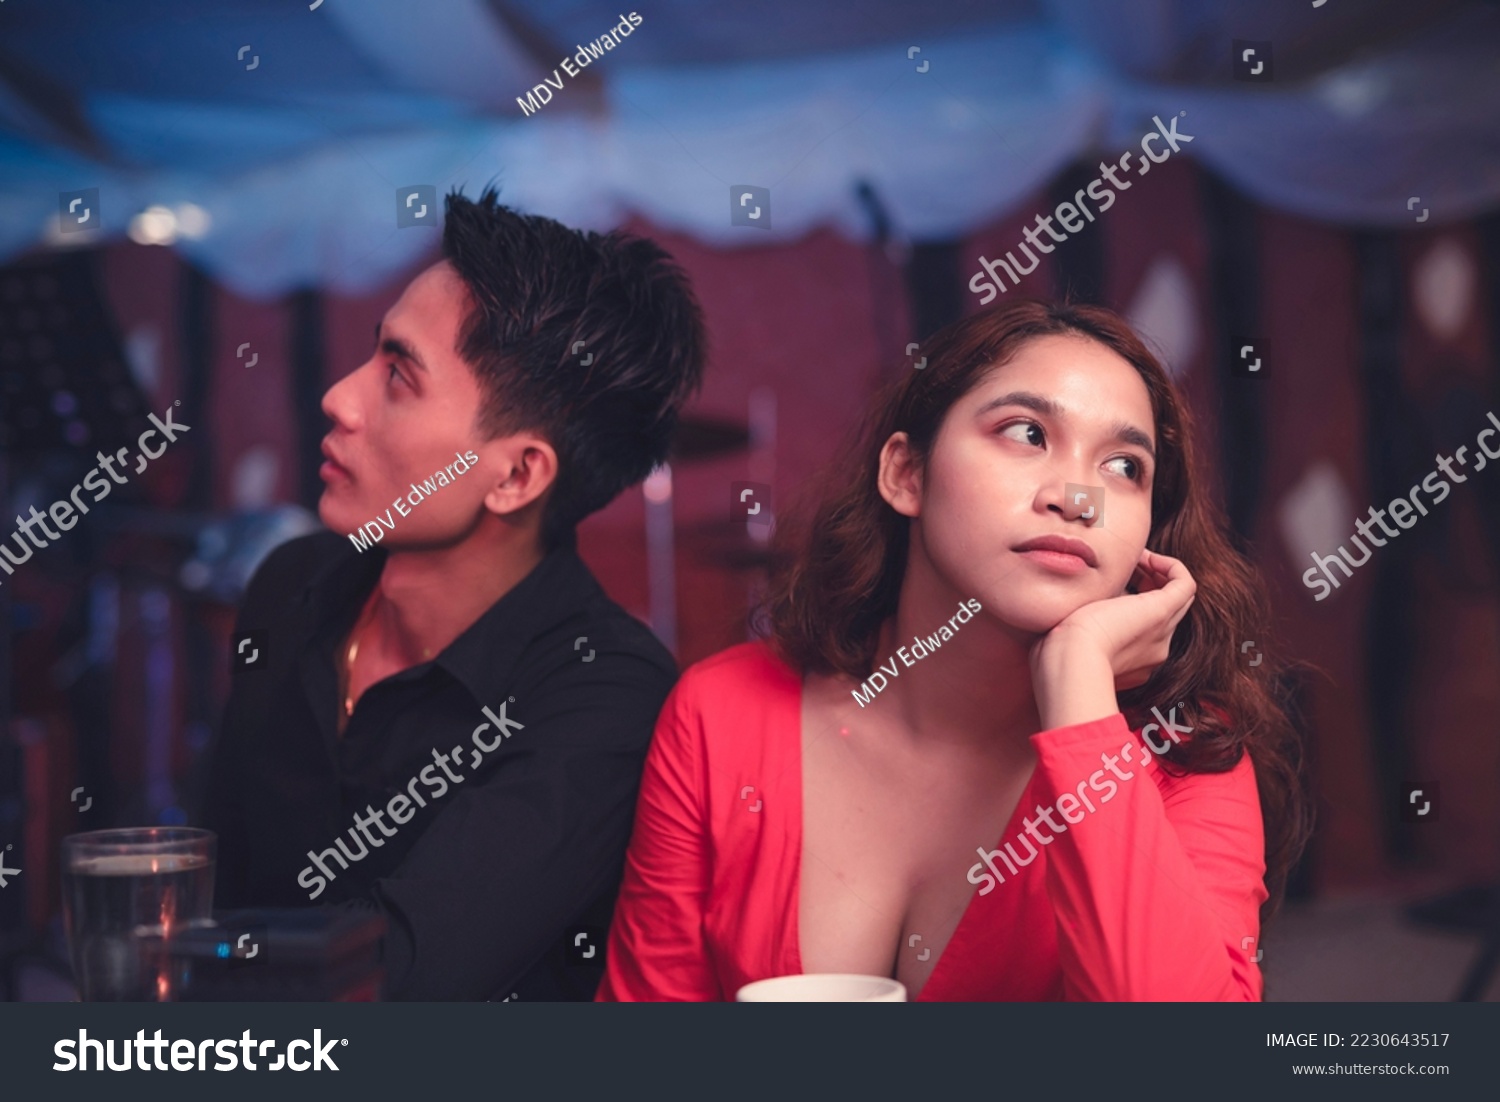 A couple having a date at an elegant restaurant sits back to back and ignores each other as they are having an argument. A lady is upset with her insensitive boyfriend. Waiting for the night to end. #2230643517